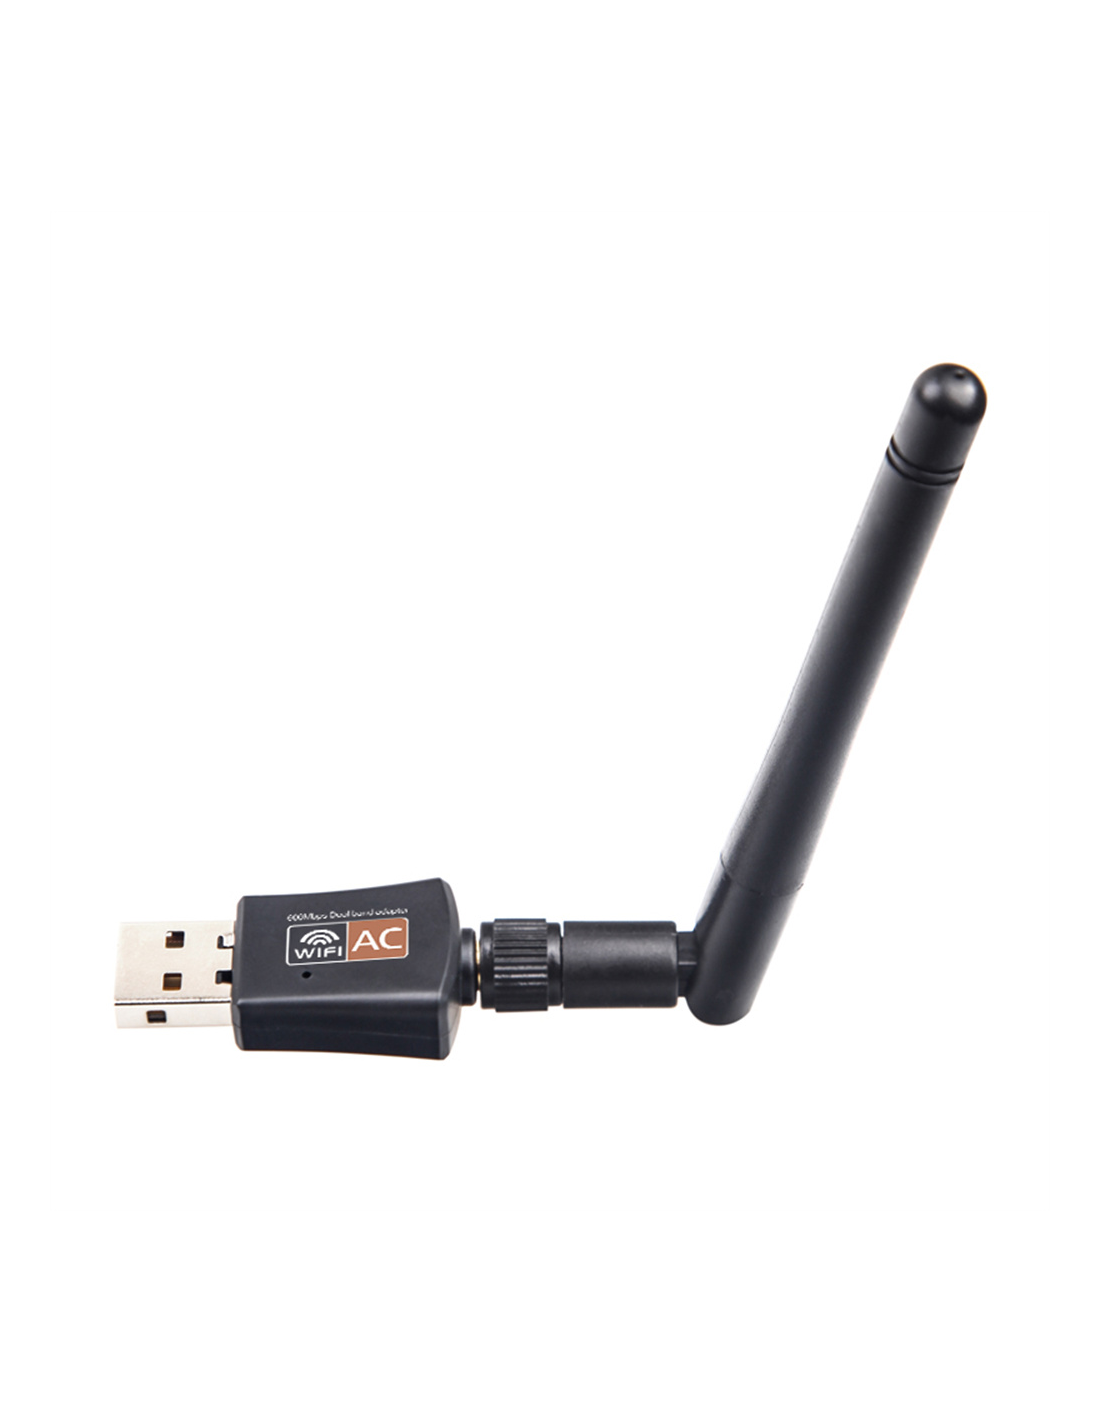 Adaptateur clef USB Wi-Fi 600 Mbps Dual Band 2.4GHz / 5GHz